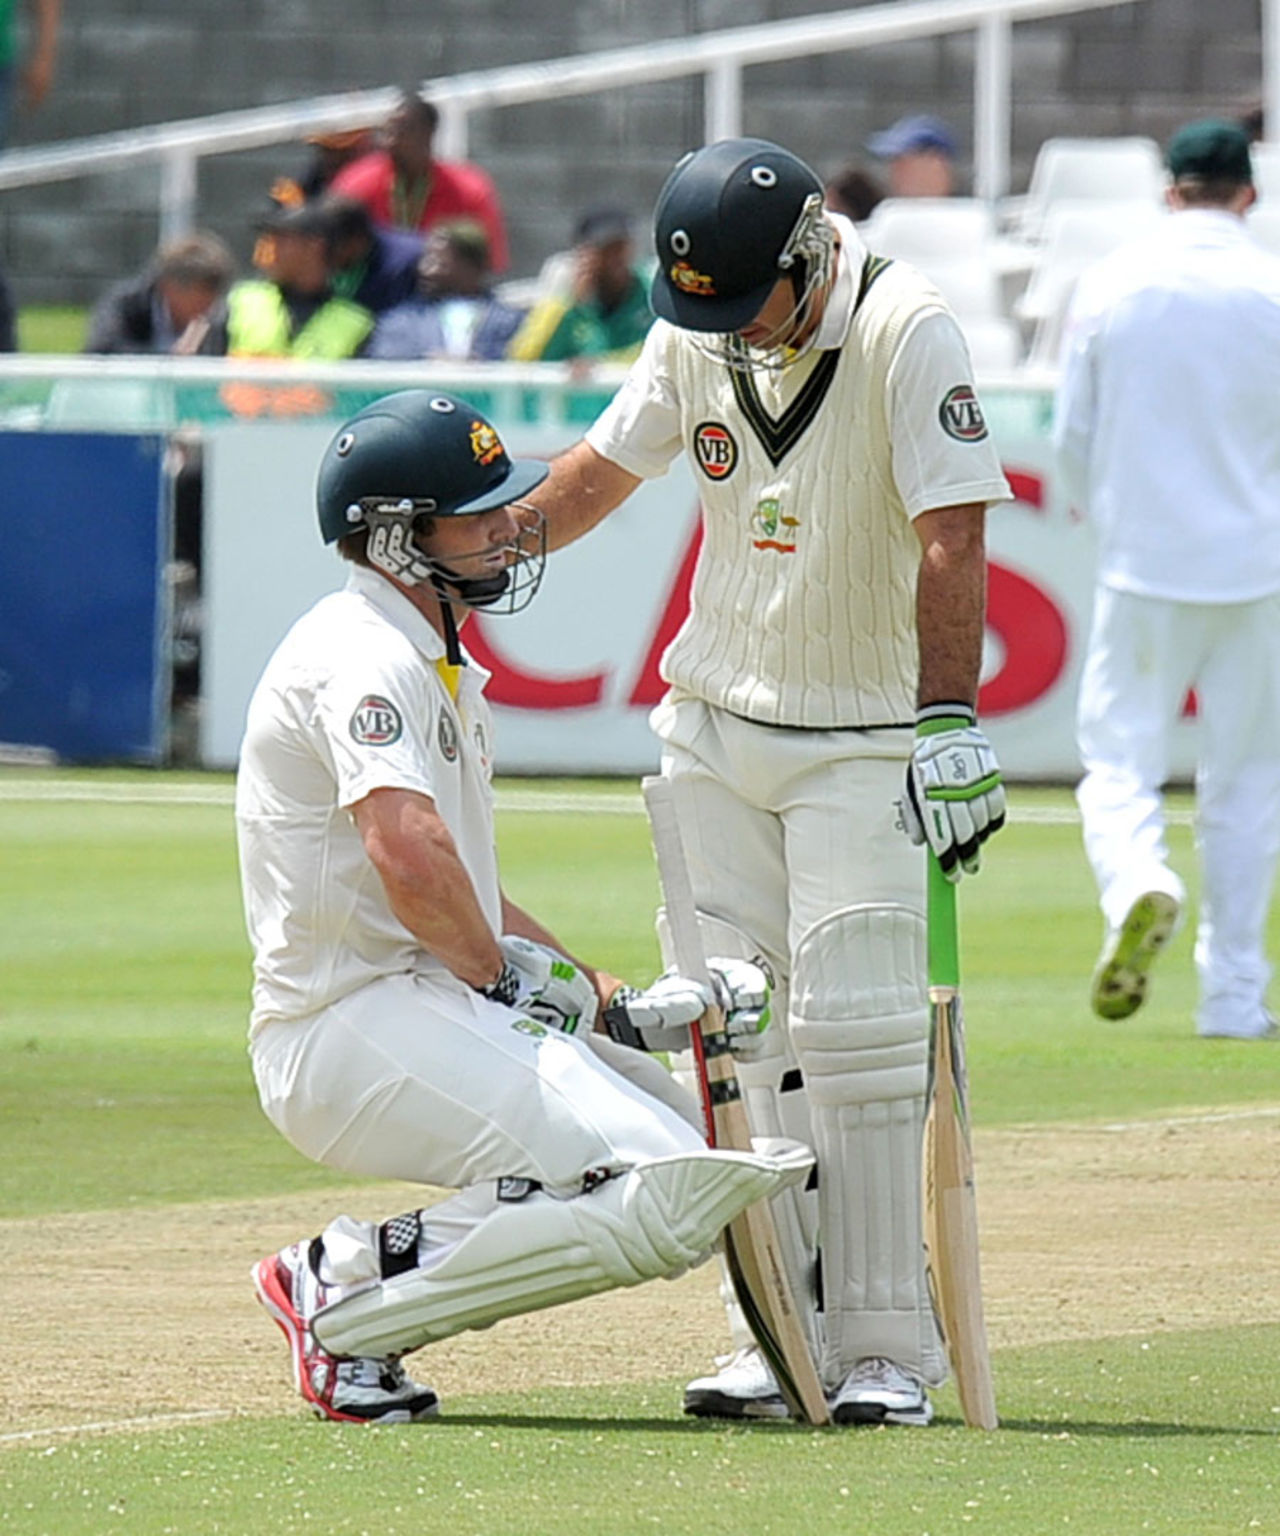 Shaun Marsh takes a break after being struck by the ball, South Africa v Australia, 1st Test, Cape Town, 1st day, November 9, 2011